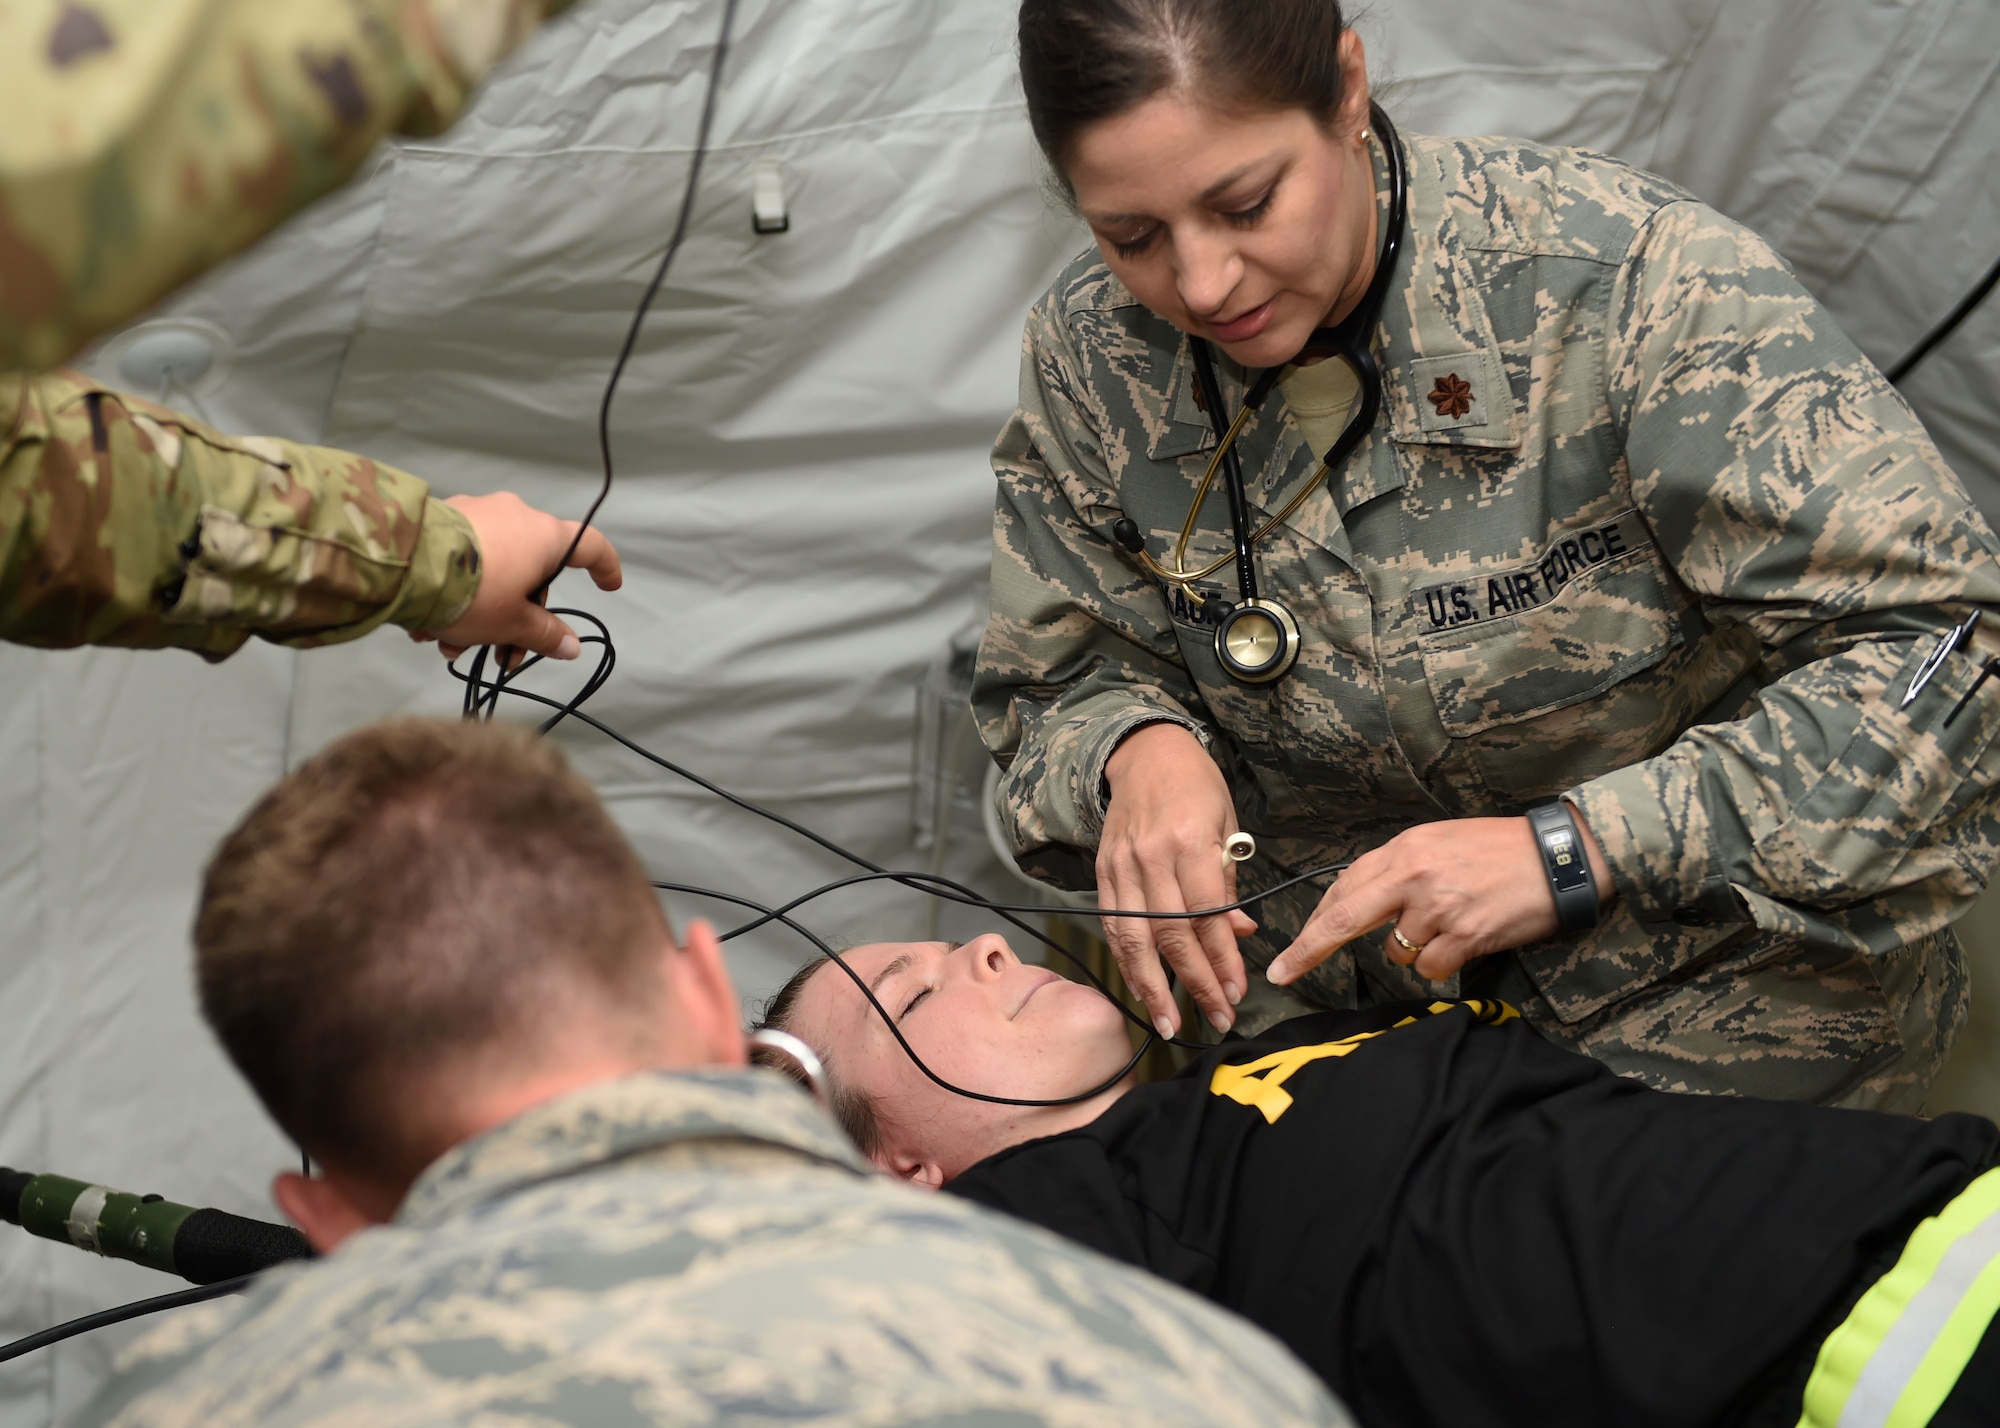 Maj. Tonja Winekauf, a nurse practioner, attends to a patient during a joint training exercise July 24, 2017, at Camp Dodge in Johnston, Iowa. Medics from the Iowa Air and Army National Guard as well as Kosovo and the United Kingdom gathered for the two-week exercise. (U.S. Air National Guard photo by Staff Sgt. Michael J. Kelly)